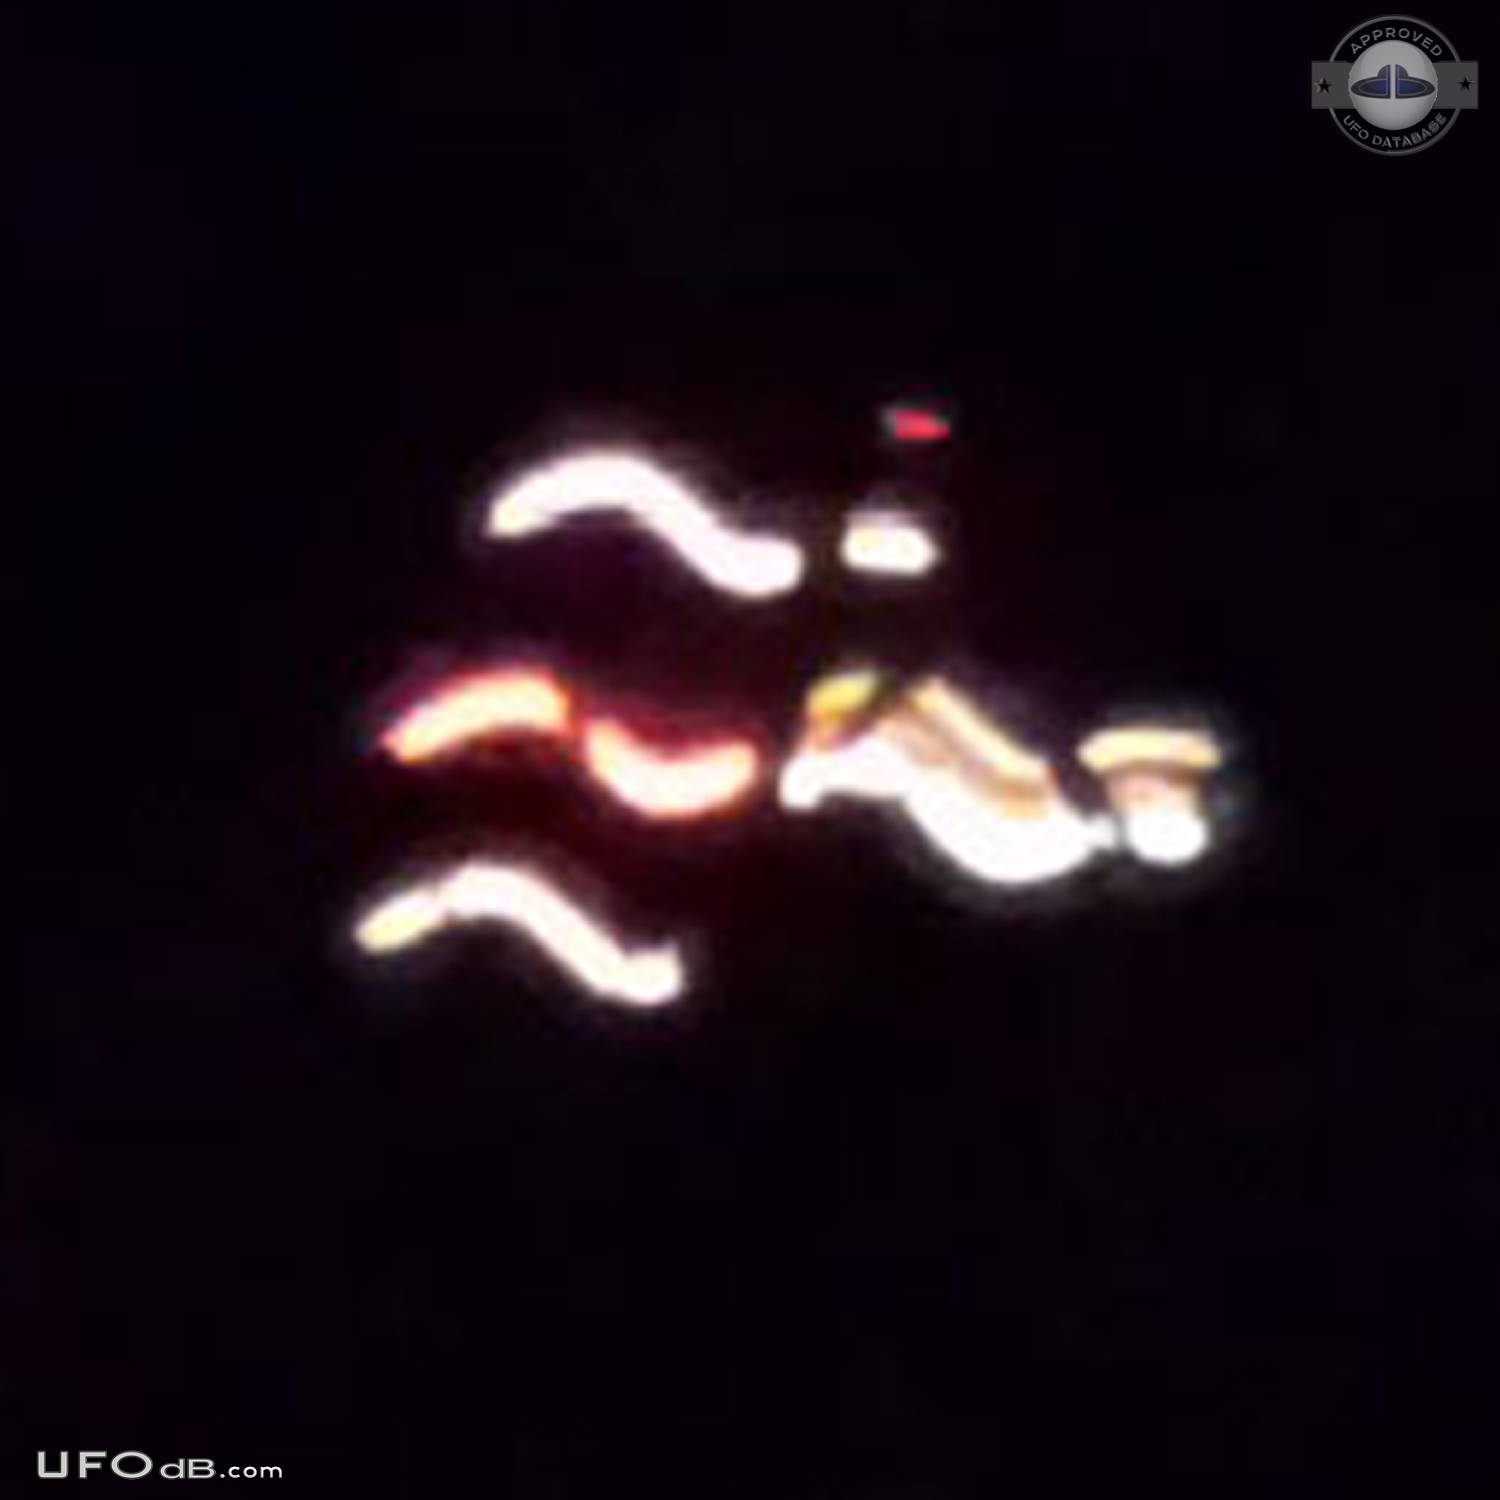 Strange object in the sky of Timmins Ontario Canada on January 22 2015 UFO Picture #581-7